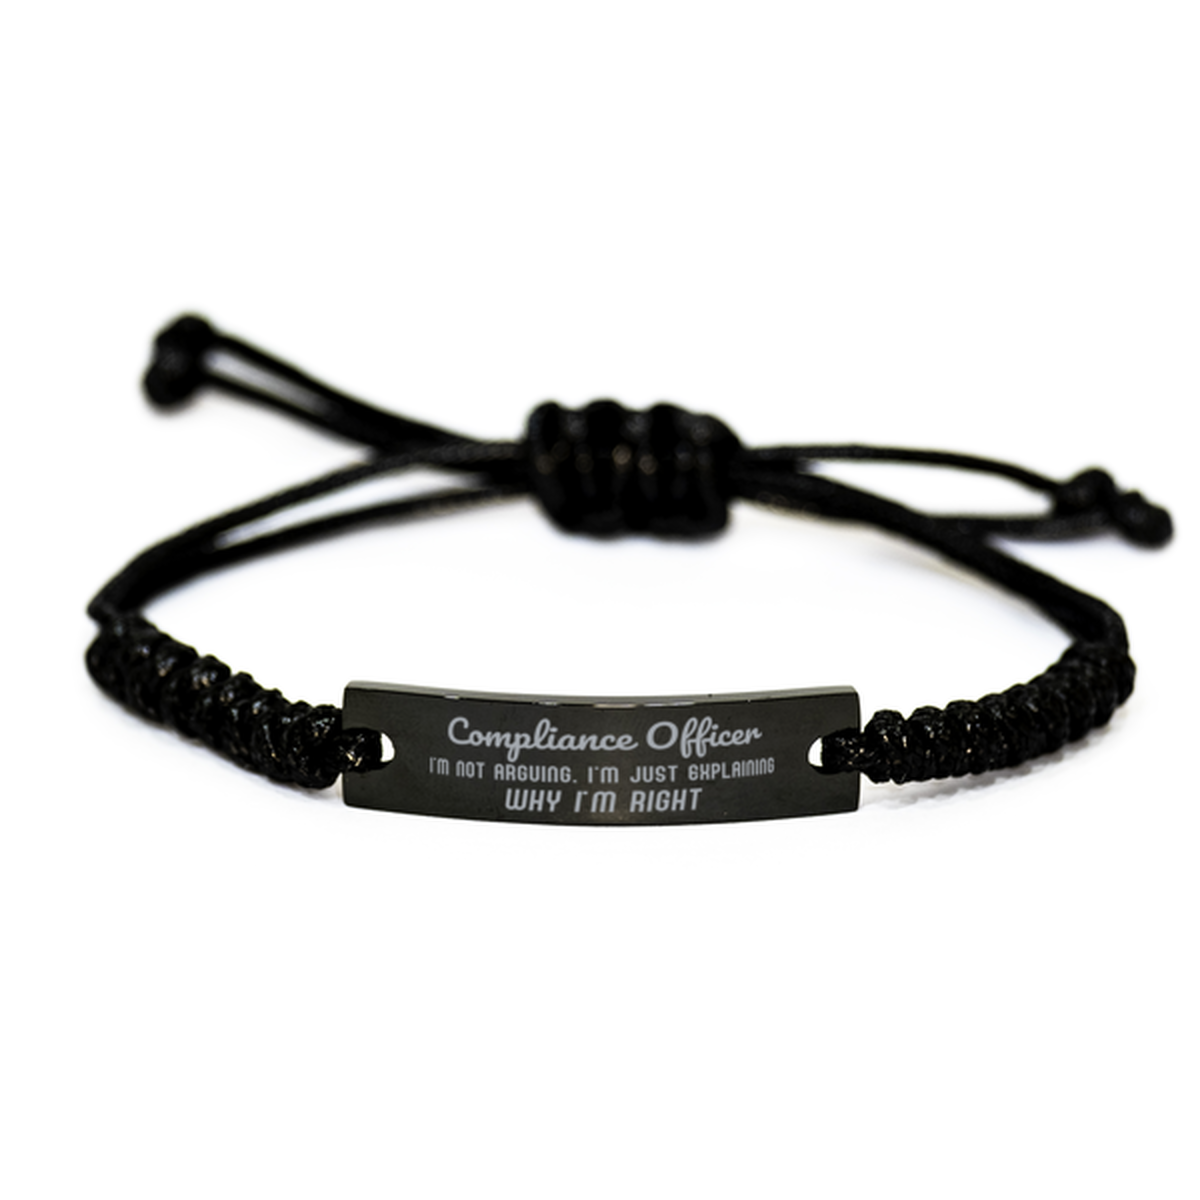 Compliance Officer I'm not Arguing. I'm Just Explaining Why I'm RIGHT Black Rope Bracelet, Funny Saying Quote Compliance Officer Gifts For Compliance Officer Graduation Birthday Christmas Gifts for Men Women Coworker